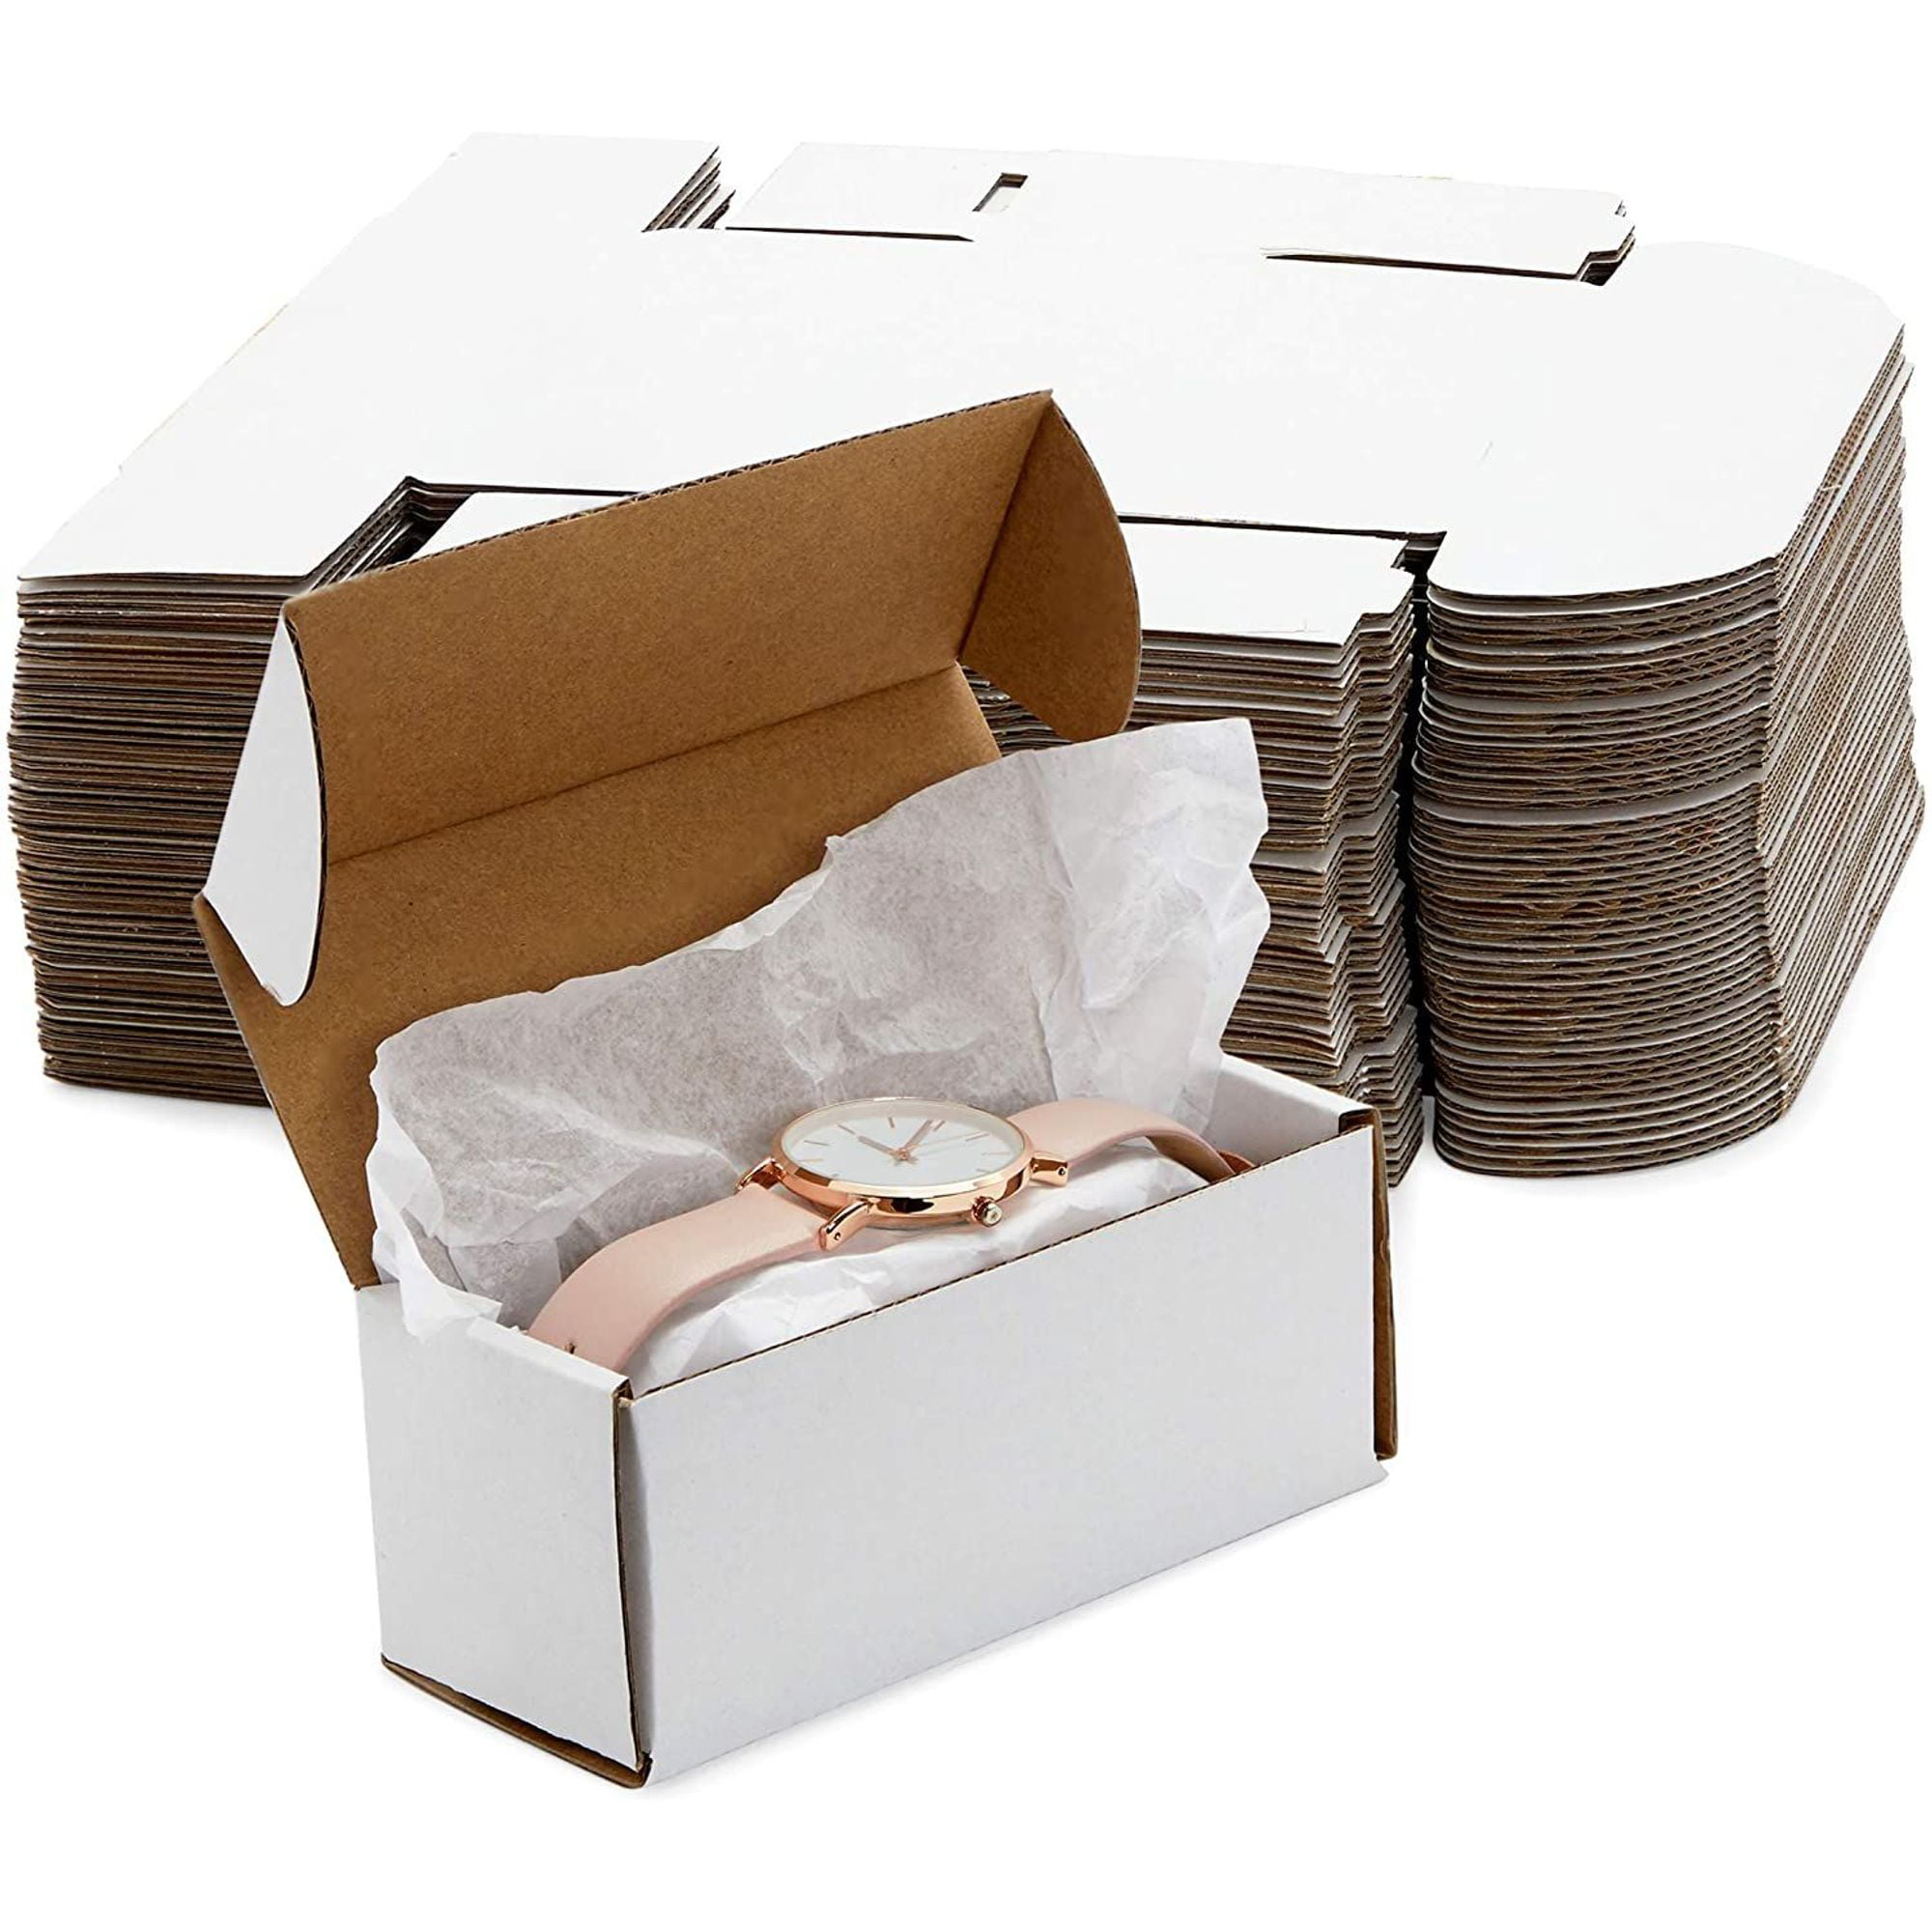 15 Pack 4x4x2 White Corrugated Shipping Mailer Packing Box Boxes 4" x 4" x 2"